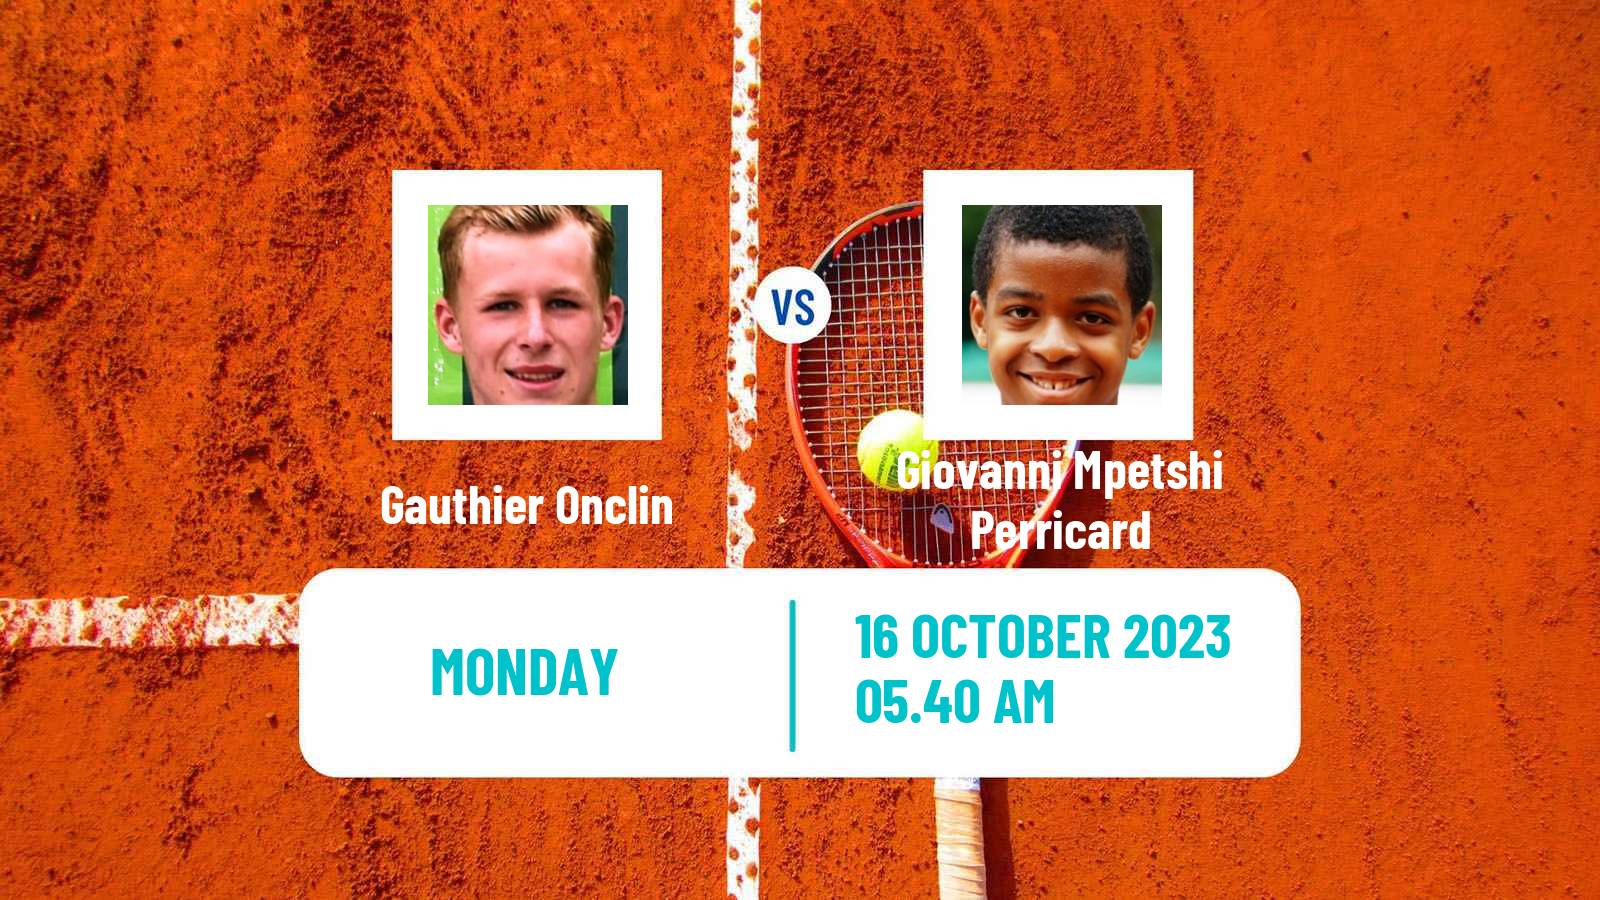 Tennis ATP Antwerp Gauthier Onclin - Giovanni Mpetshi Perricard